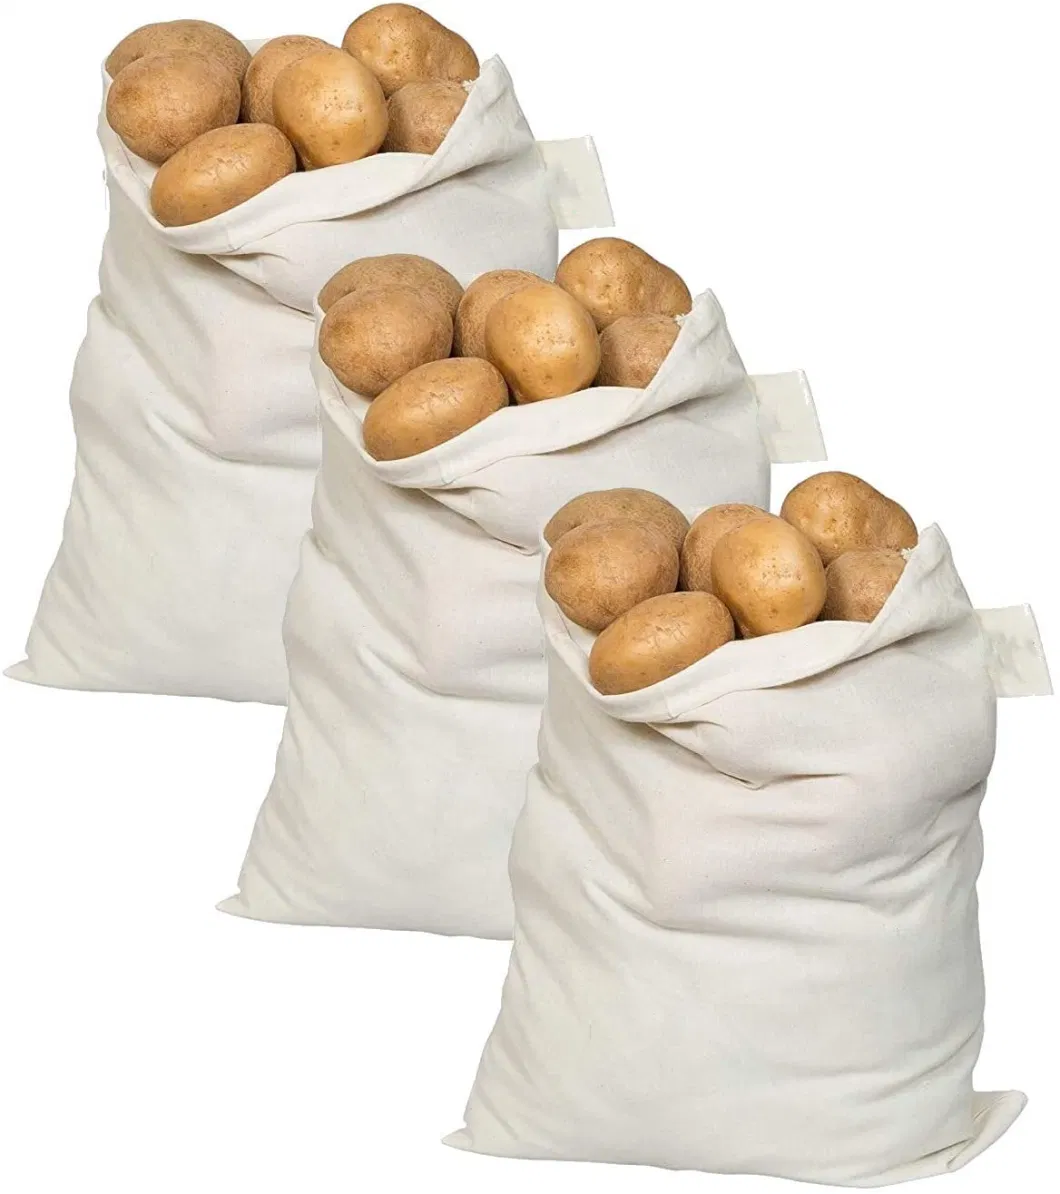 Custom RPET Reusable Storage Shopping Produce Bags for Pantry Cotton Washable Potato Root Vegetable Sacks with Drawstring